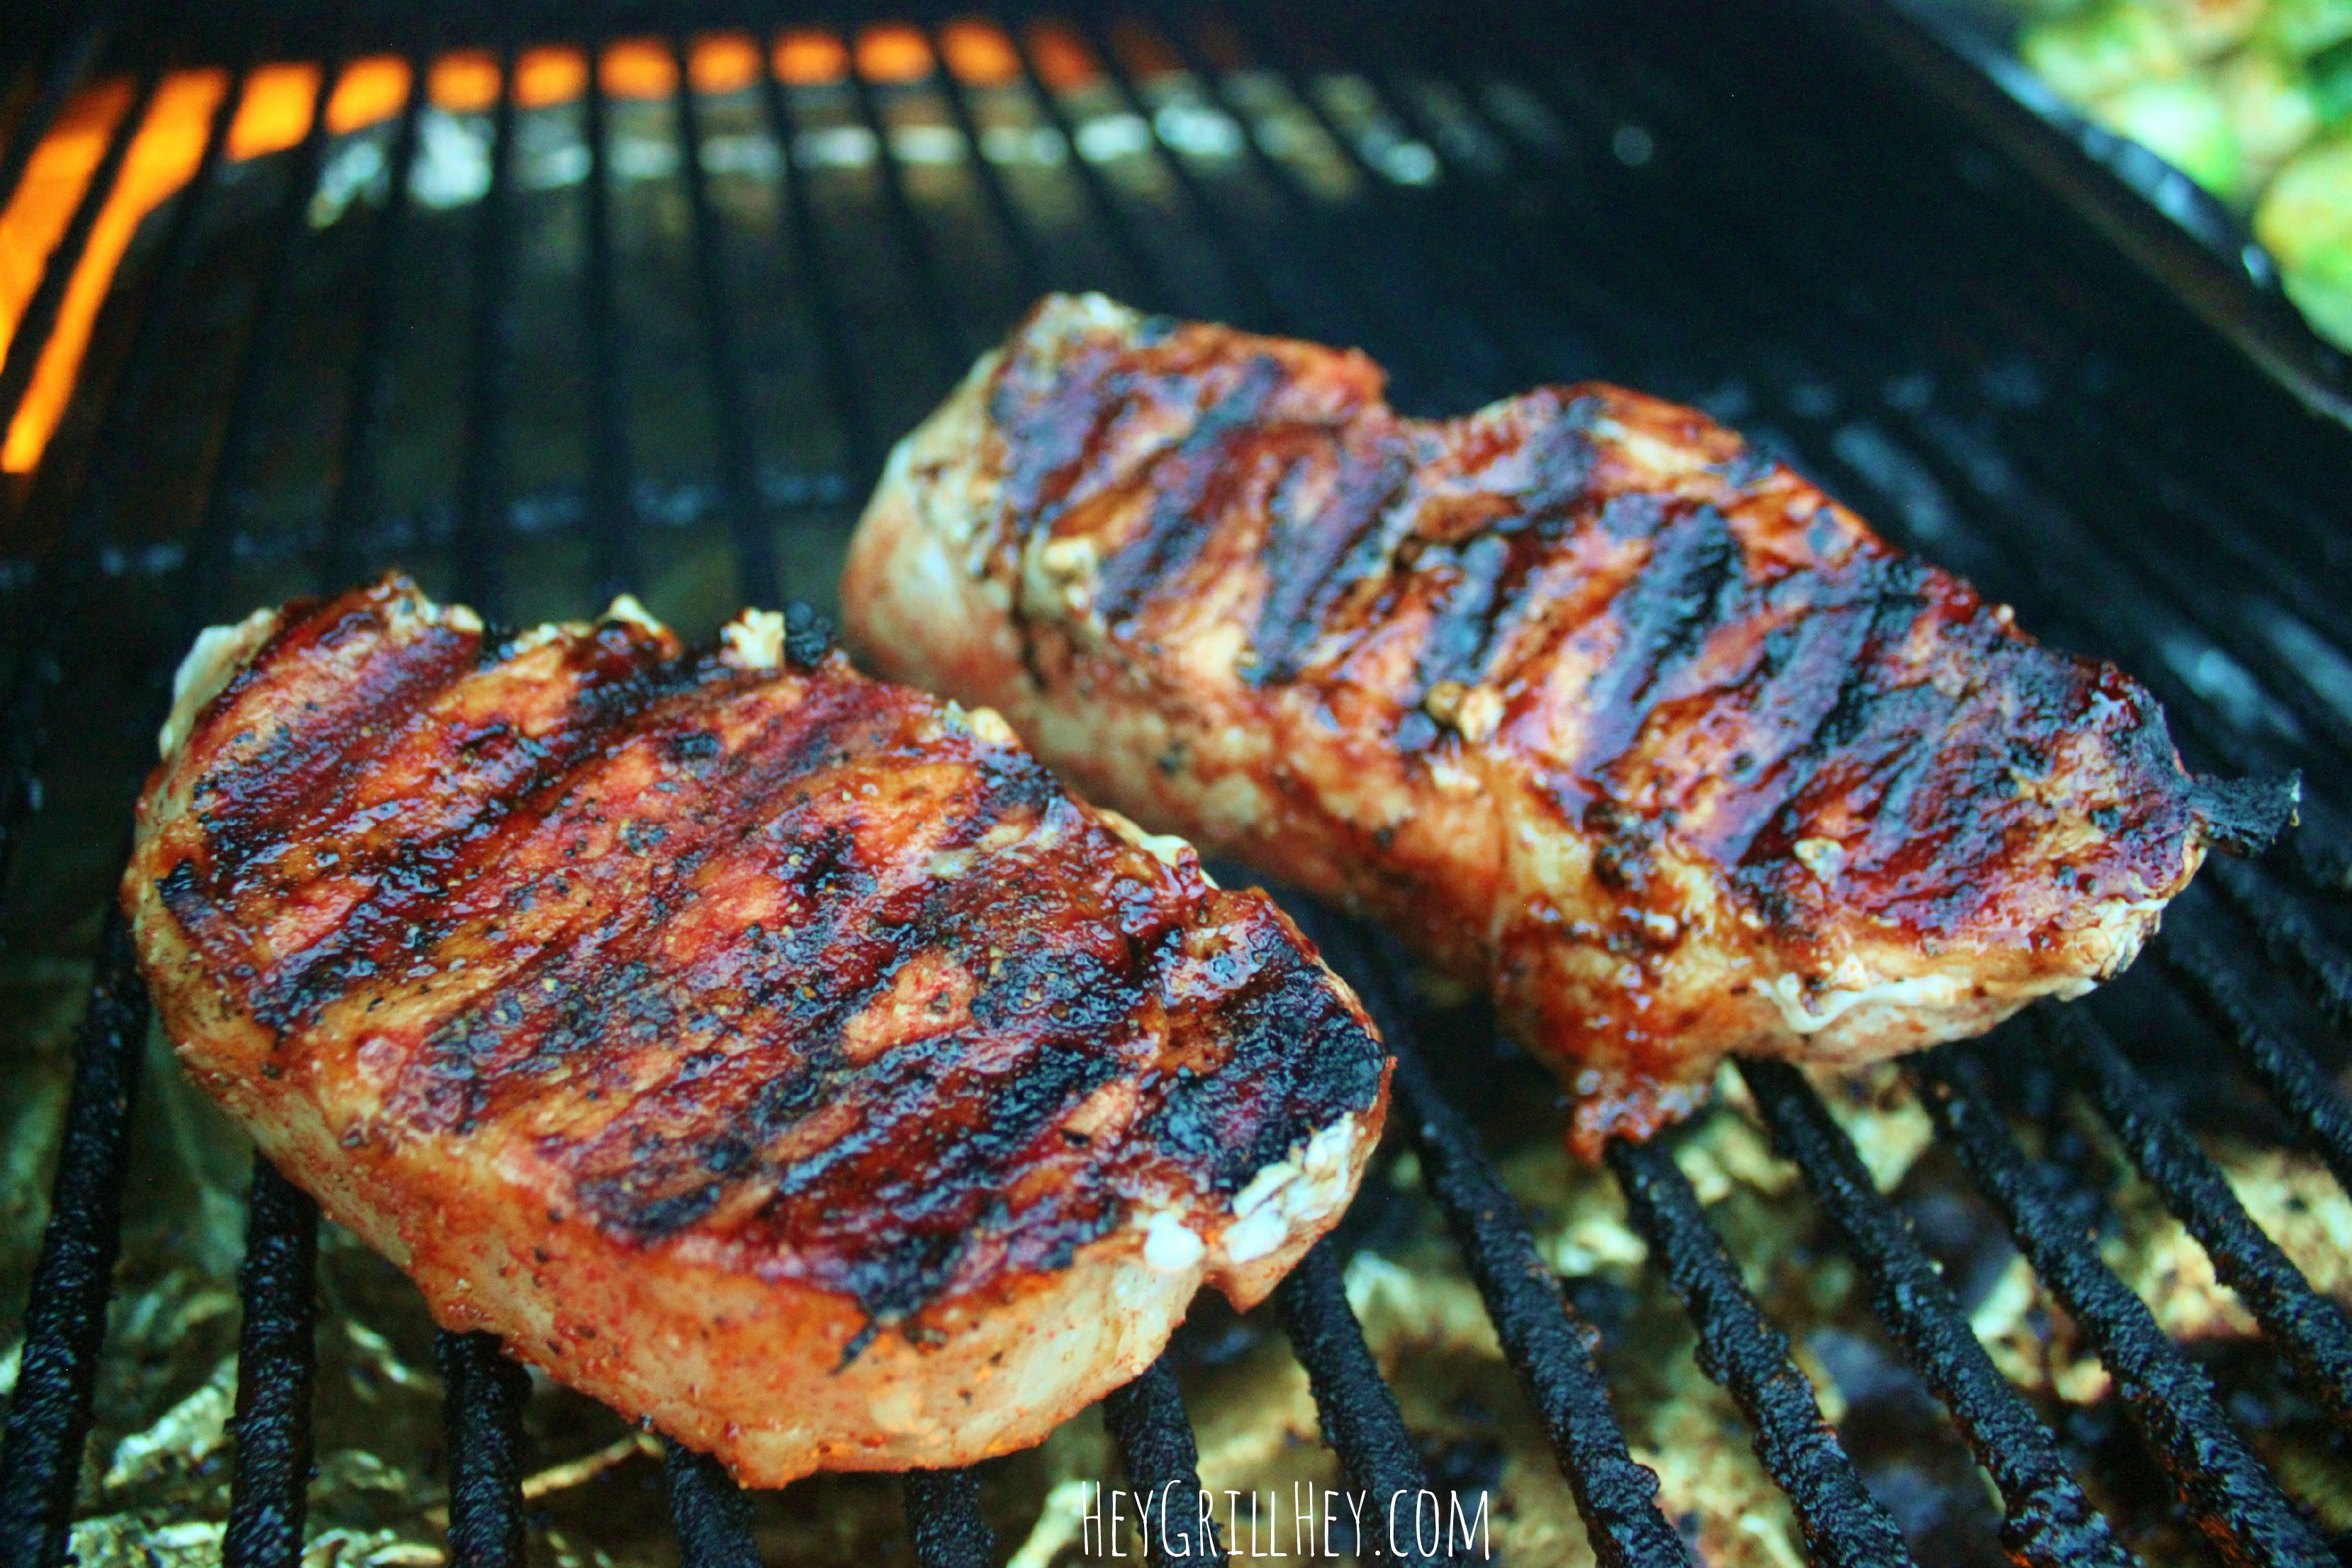 How To Grill Pork Chops On Gas Grill
 Simple Grilled Pork Chops with "Secret" Sweet Rub